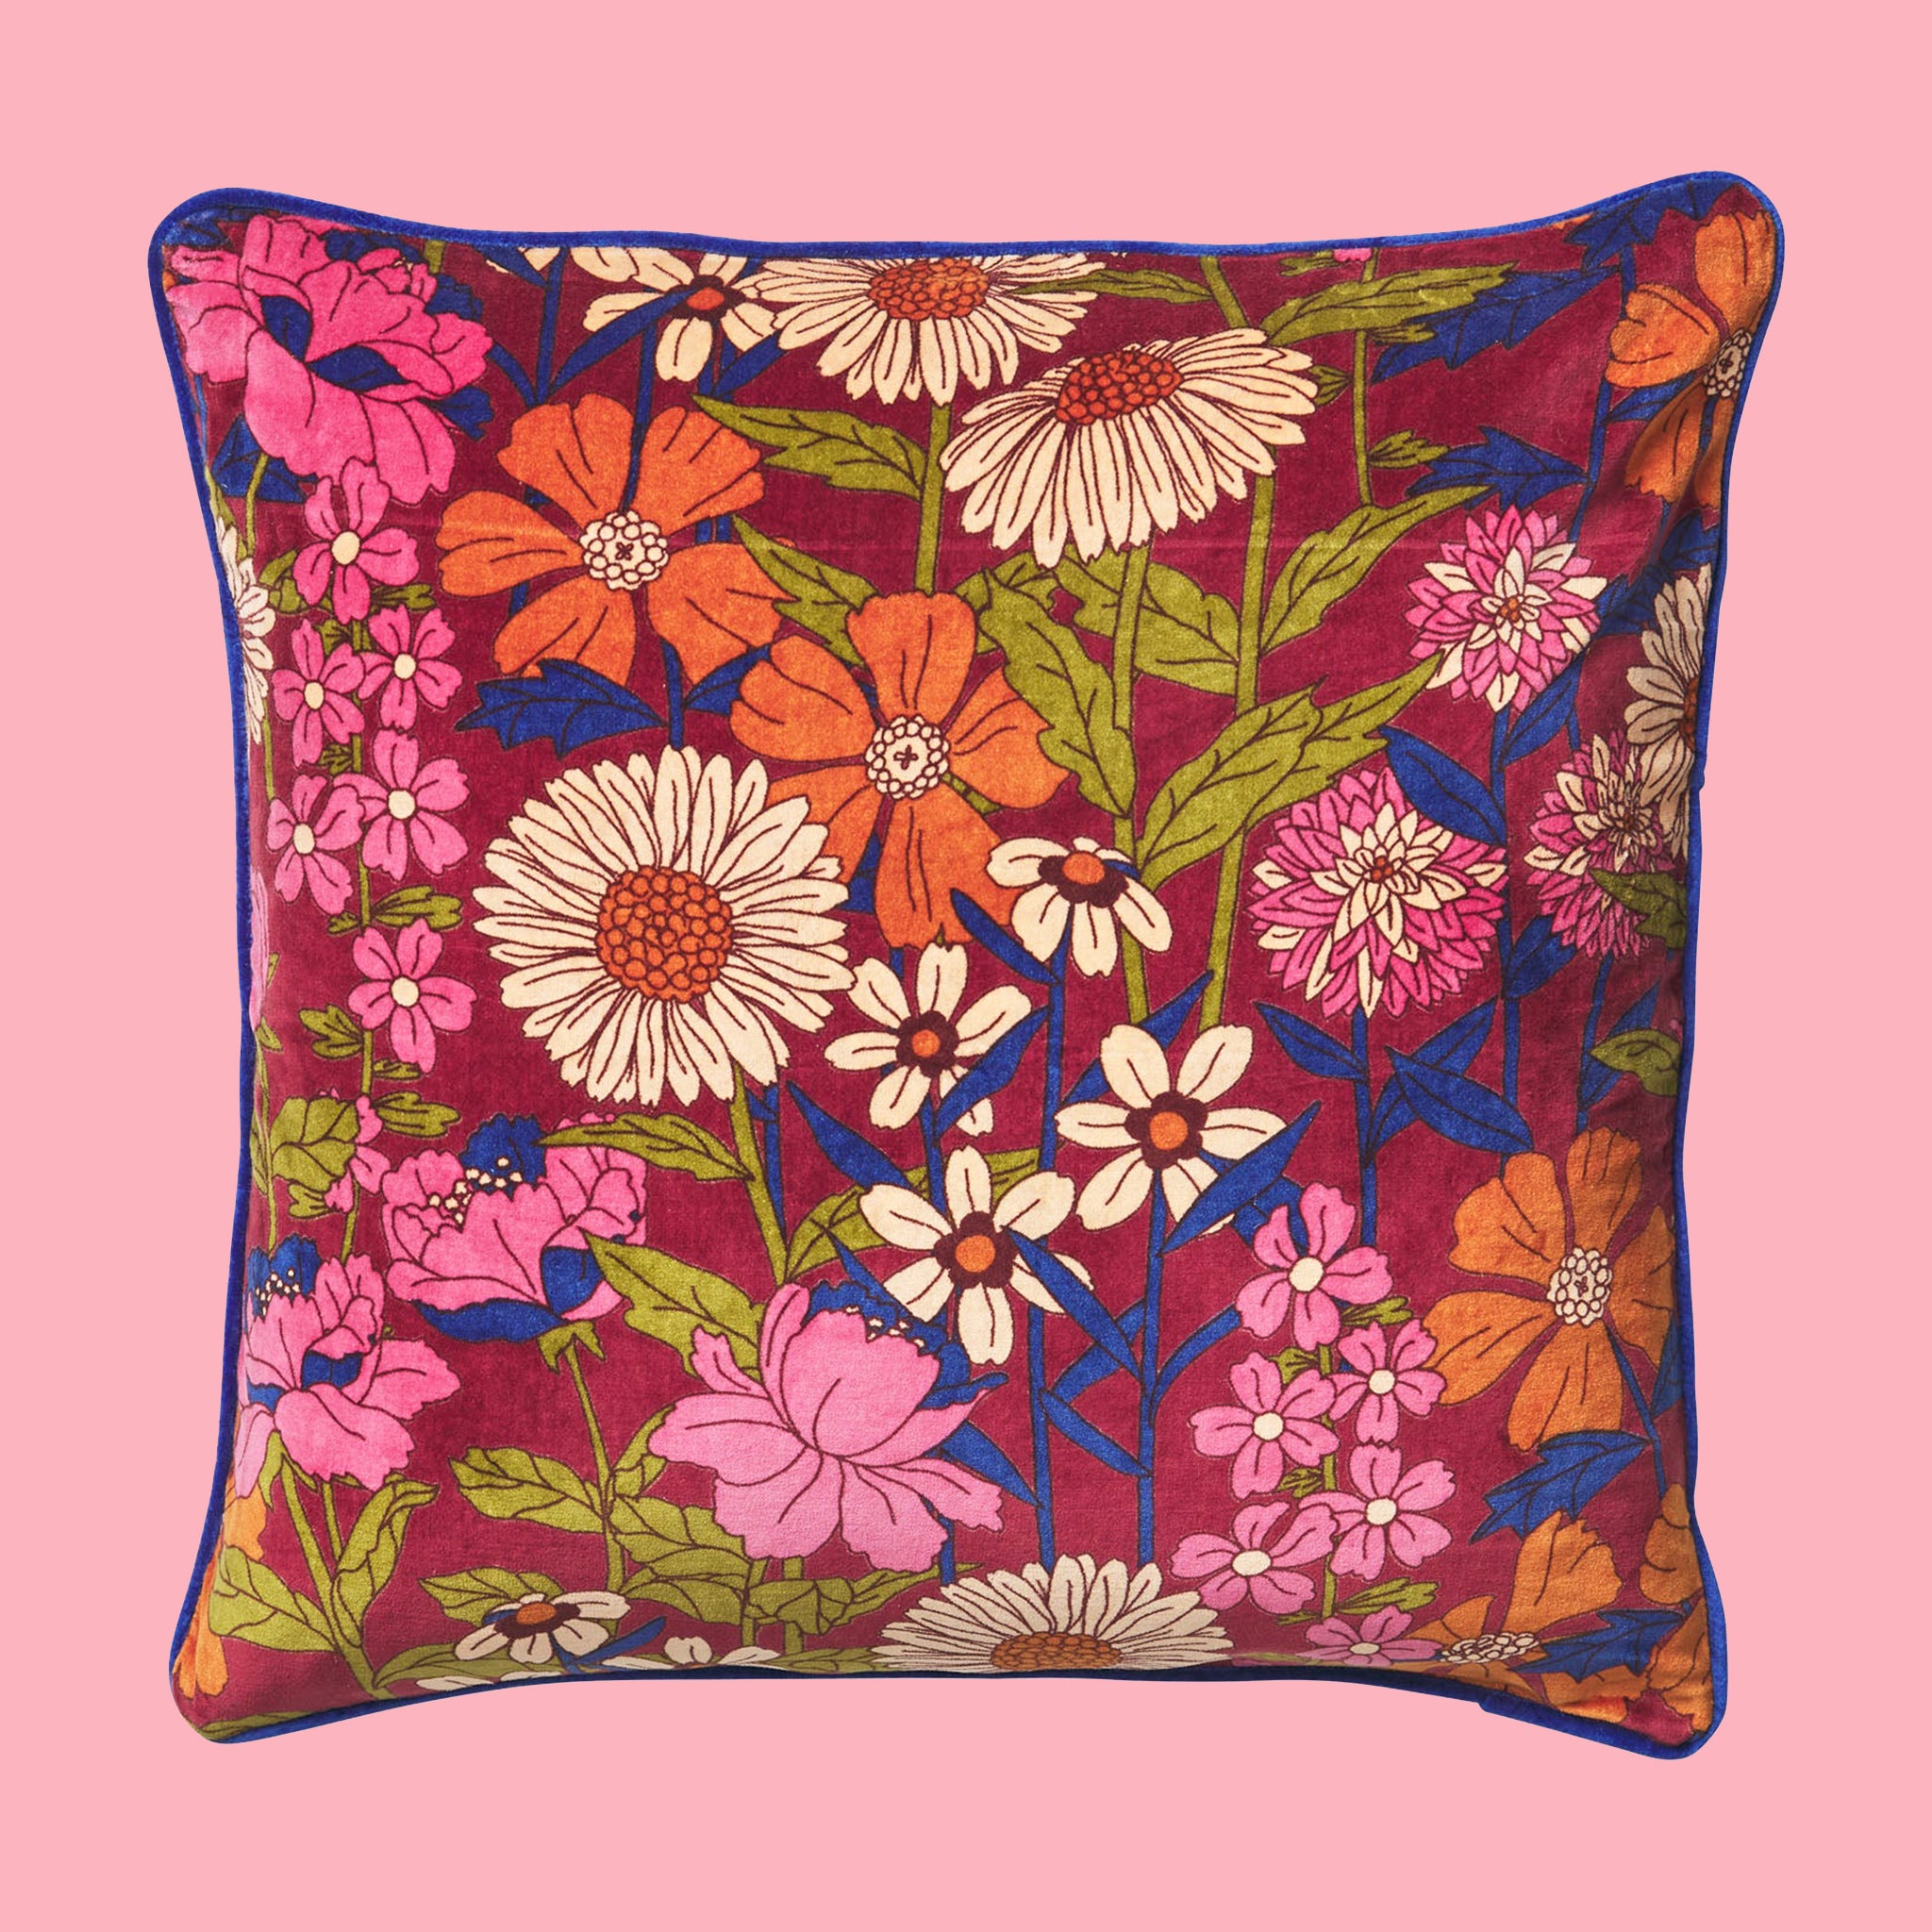 A multicolored floral print pillow. 